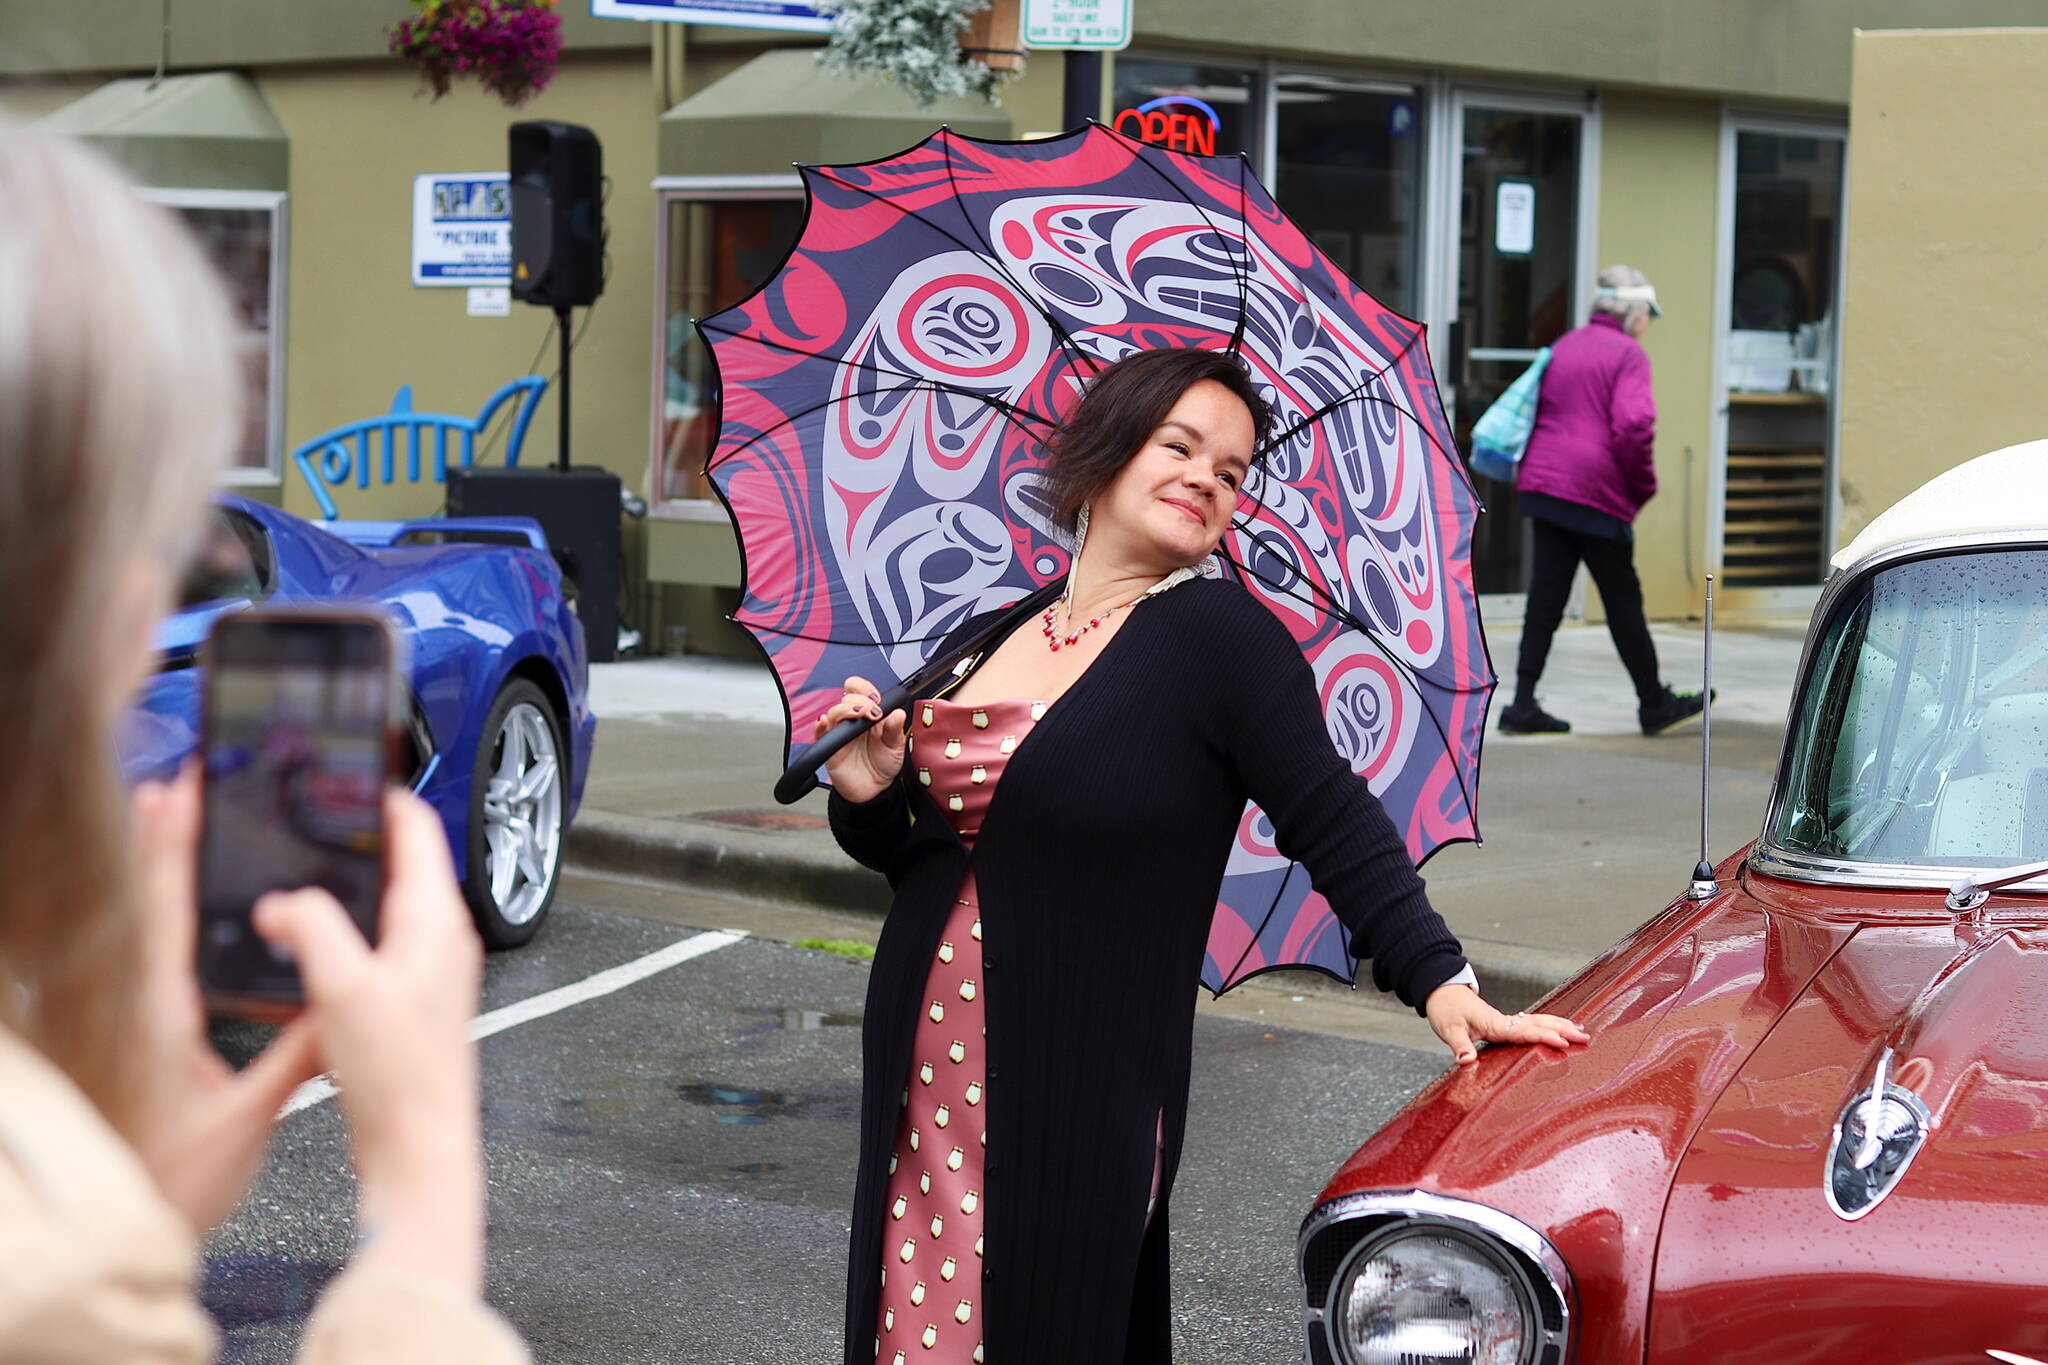 Lily Wooshkindein Da.áat Hope, a Chilkat weaver in Juneau, poses next an antique car for a photo by an audience member during Alaska Fashion Week’s outdoor runway show on Saturday. Hope was among the local designers whose outfits were featured during the show. The antique vehicles were parked along the street to provide ambiance for the outdoor exhibition. (Mark Sabbatini / Juneau Empire)